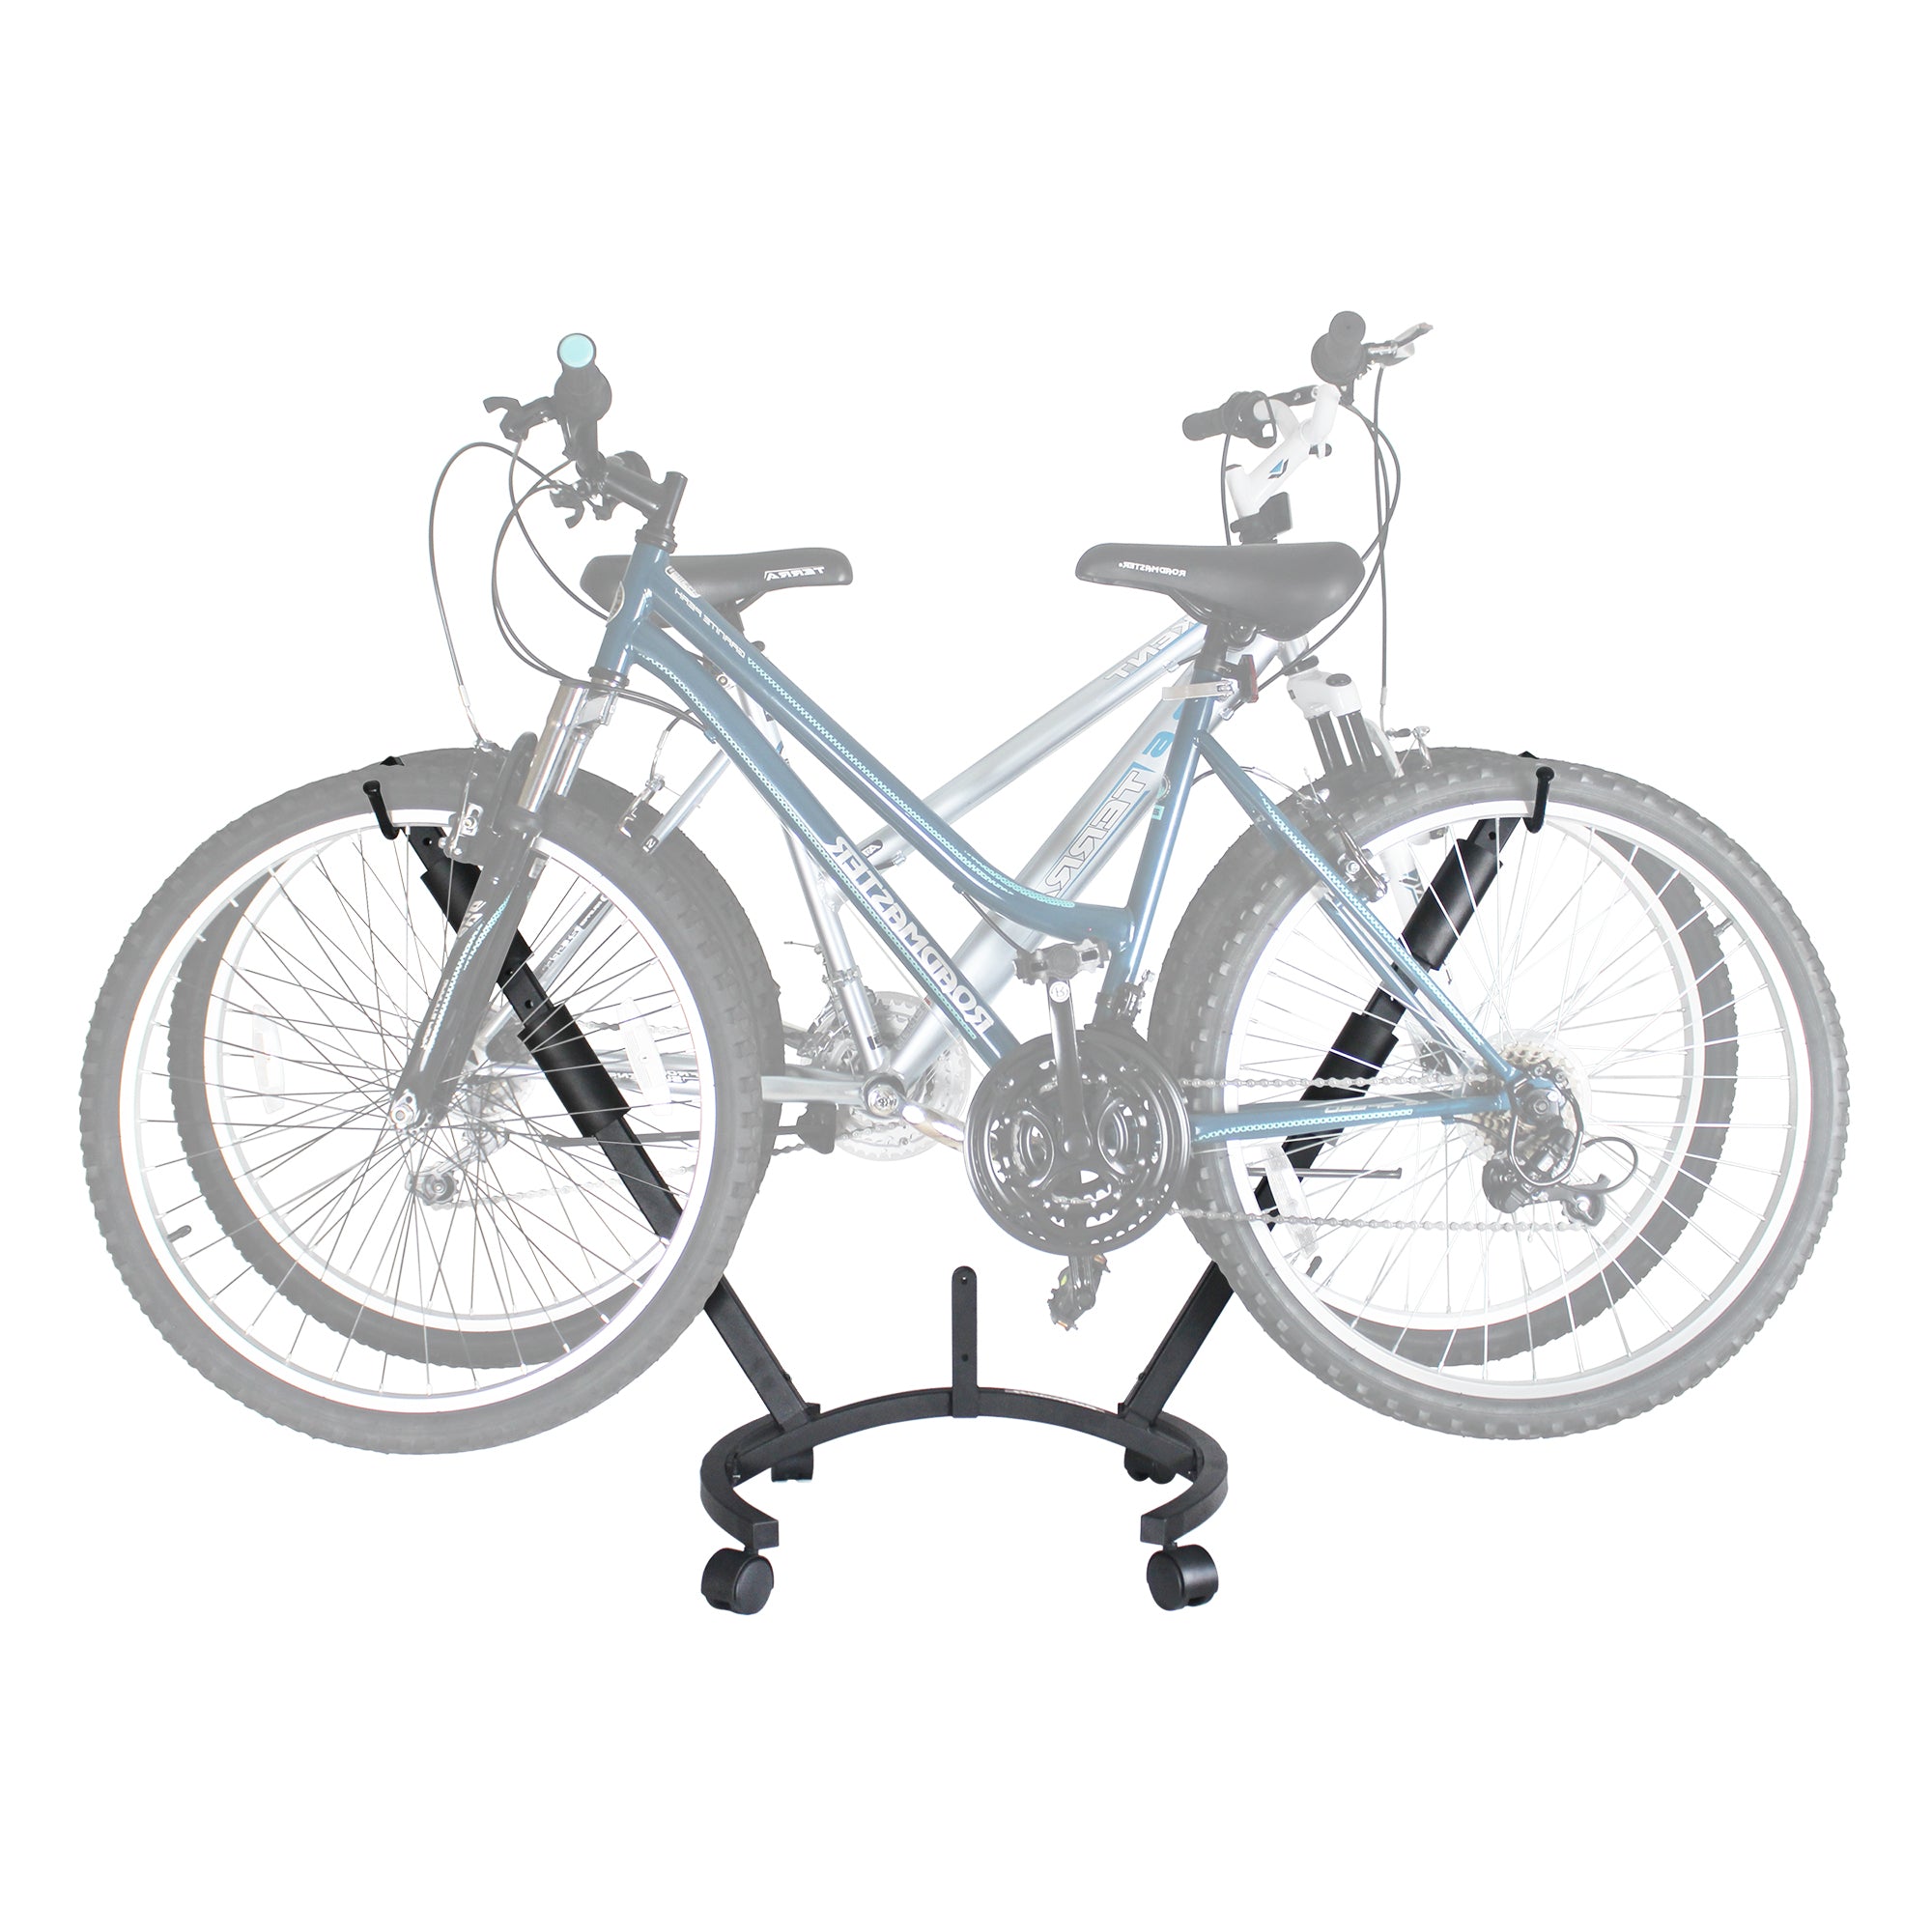 Introducing V-Tree Mobile Bicycle Storage Stands for Home, Garage & Of –  Let's Go Aero